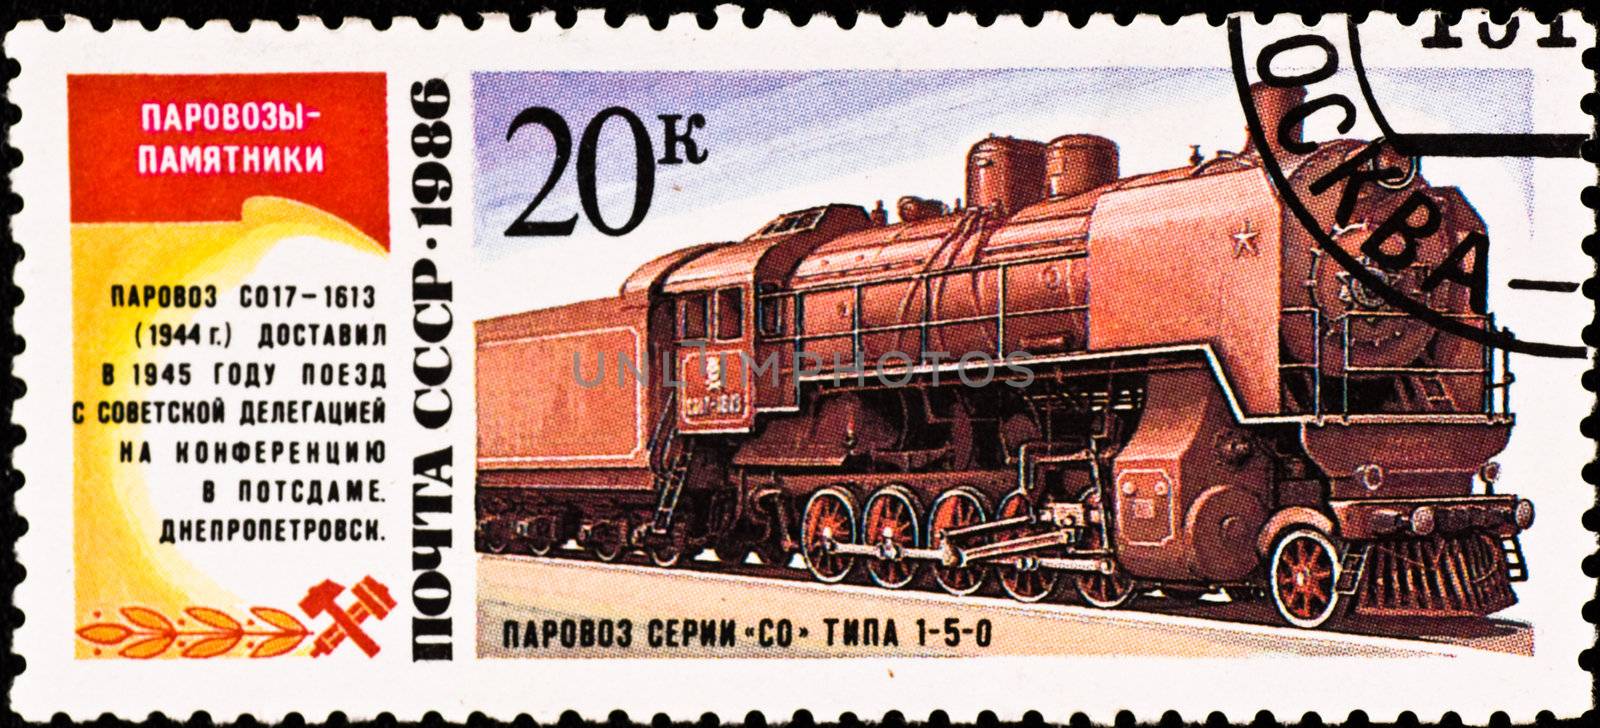 postage stamp shows vintage russian train by petr_malyshev